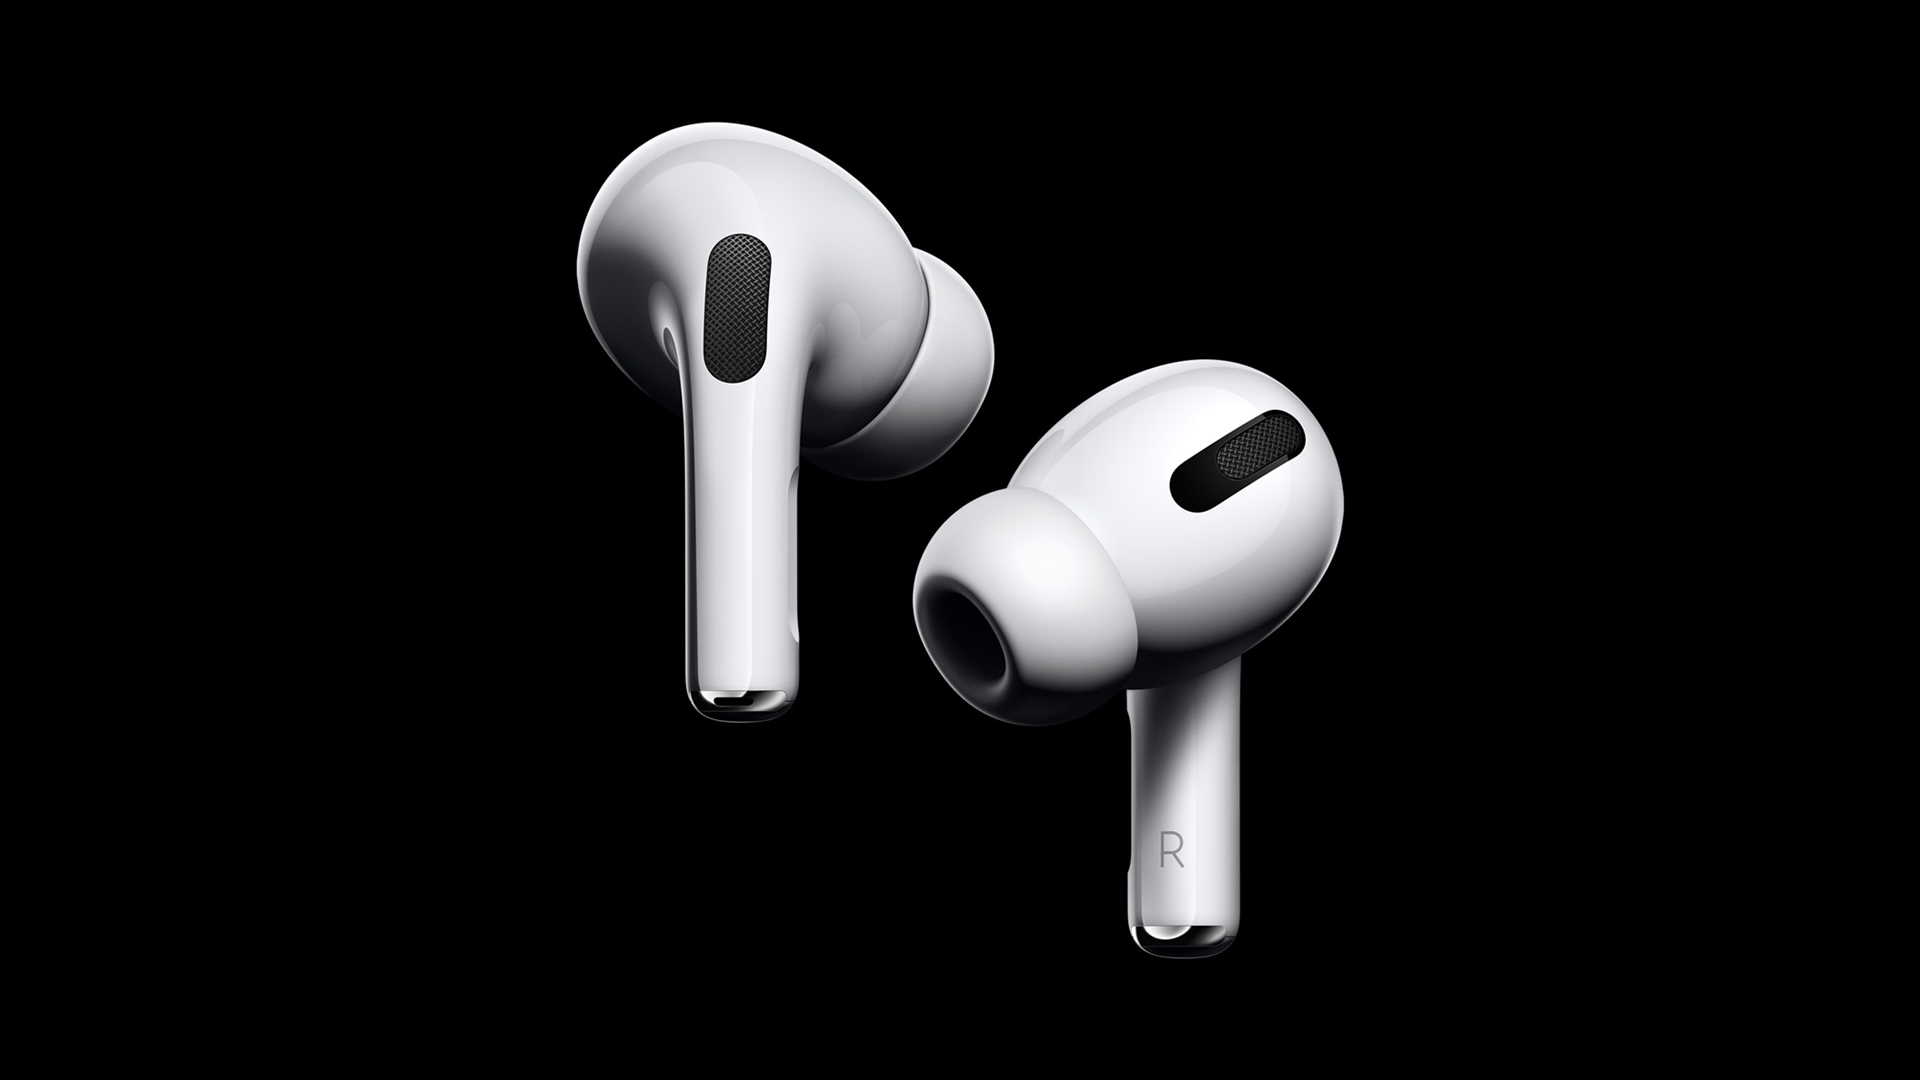 er mere end Mutton Akkumulering Apple rolls out firmware update for AirPods 3, AirPods Pro, and AirPods  Max, here's how to check for it - 9to5Mac